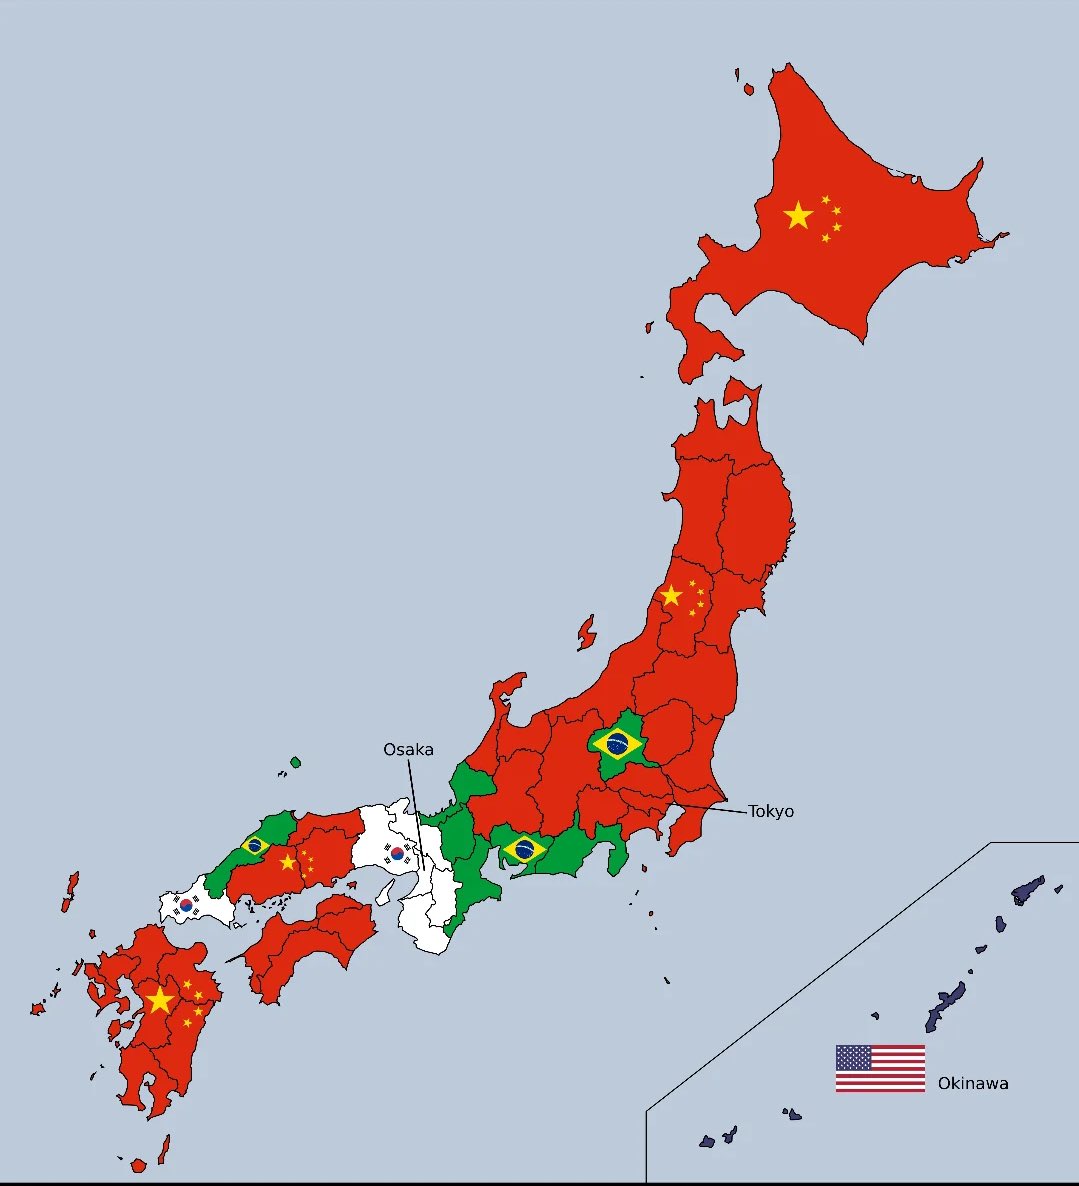 Most common foreign nationals in Japan, by prefecture.